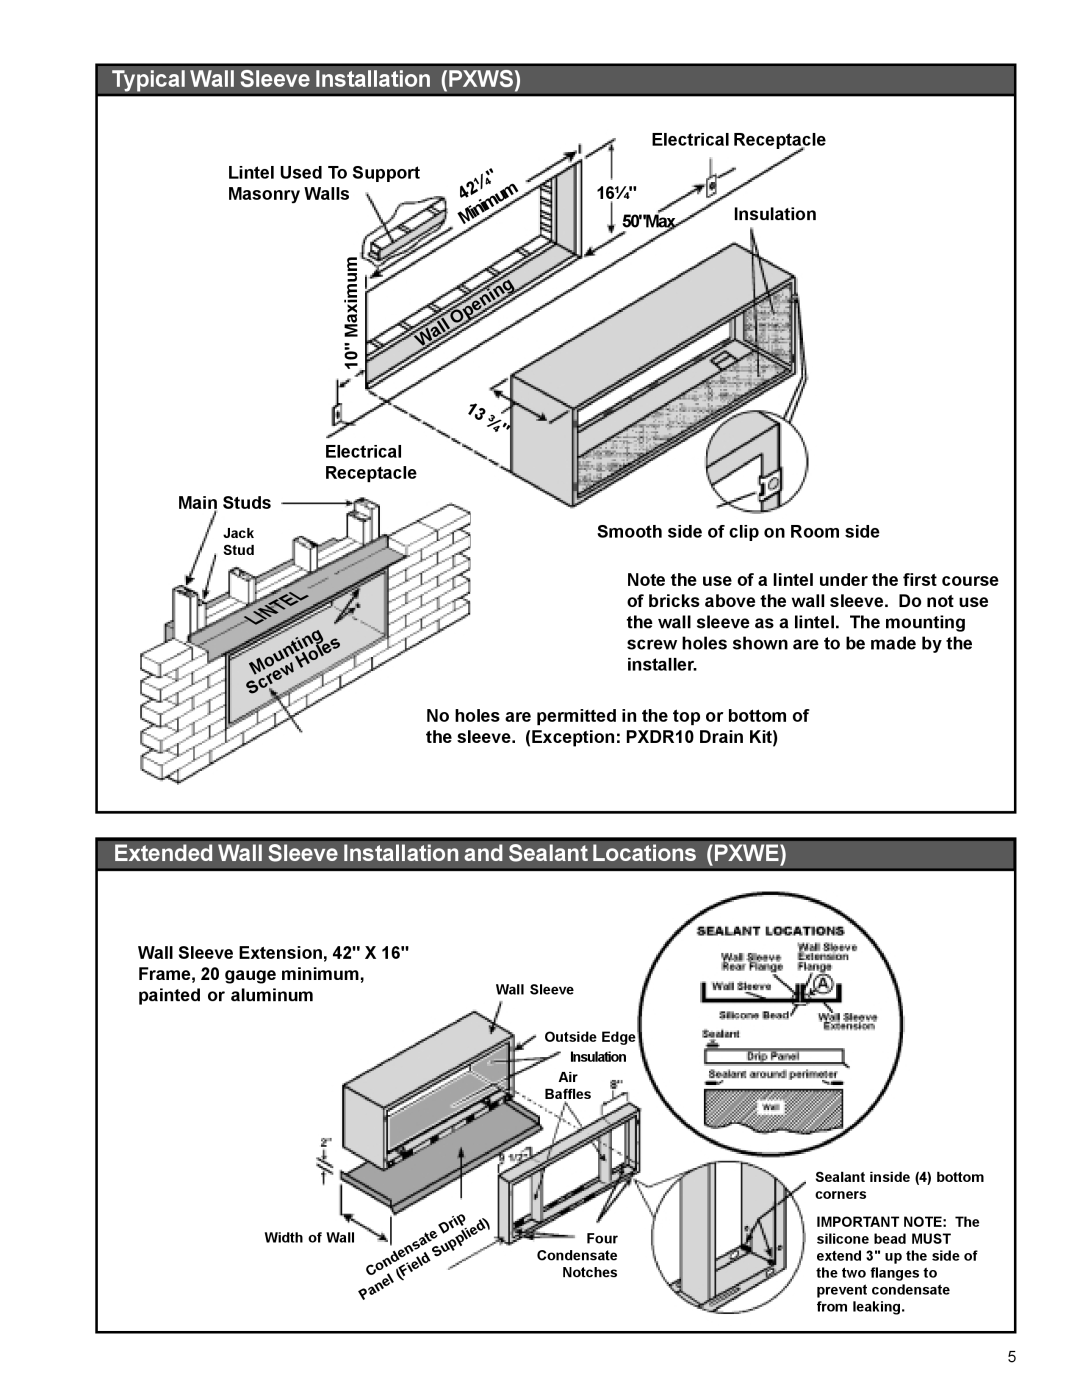 Friedrich PACKAGED TERMINAL AIR CONDITIONERS AND HEAT PUMPS Lintel Installation, Typical Wall Sleeve Installation PXWS 